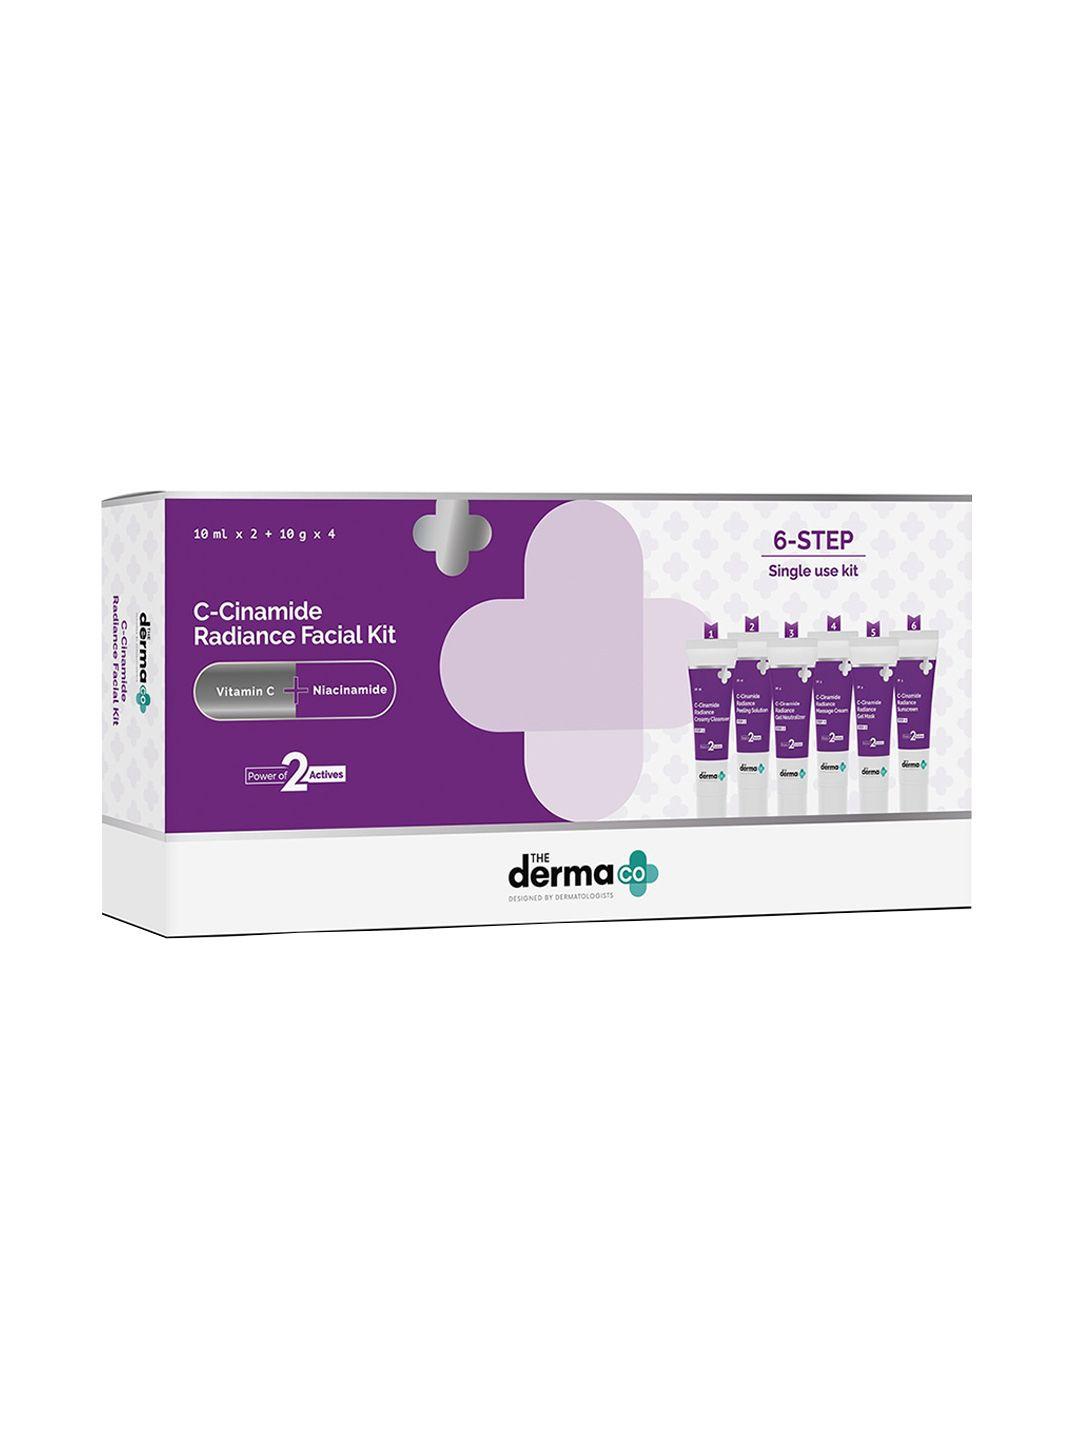 the derma co. c-cinamide radiance facial kit with vitamin c & niacinamide - 30 ml each